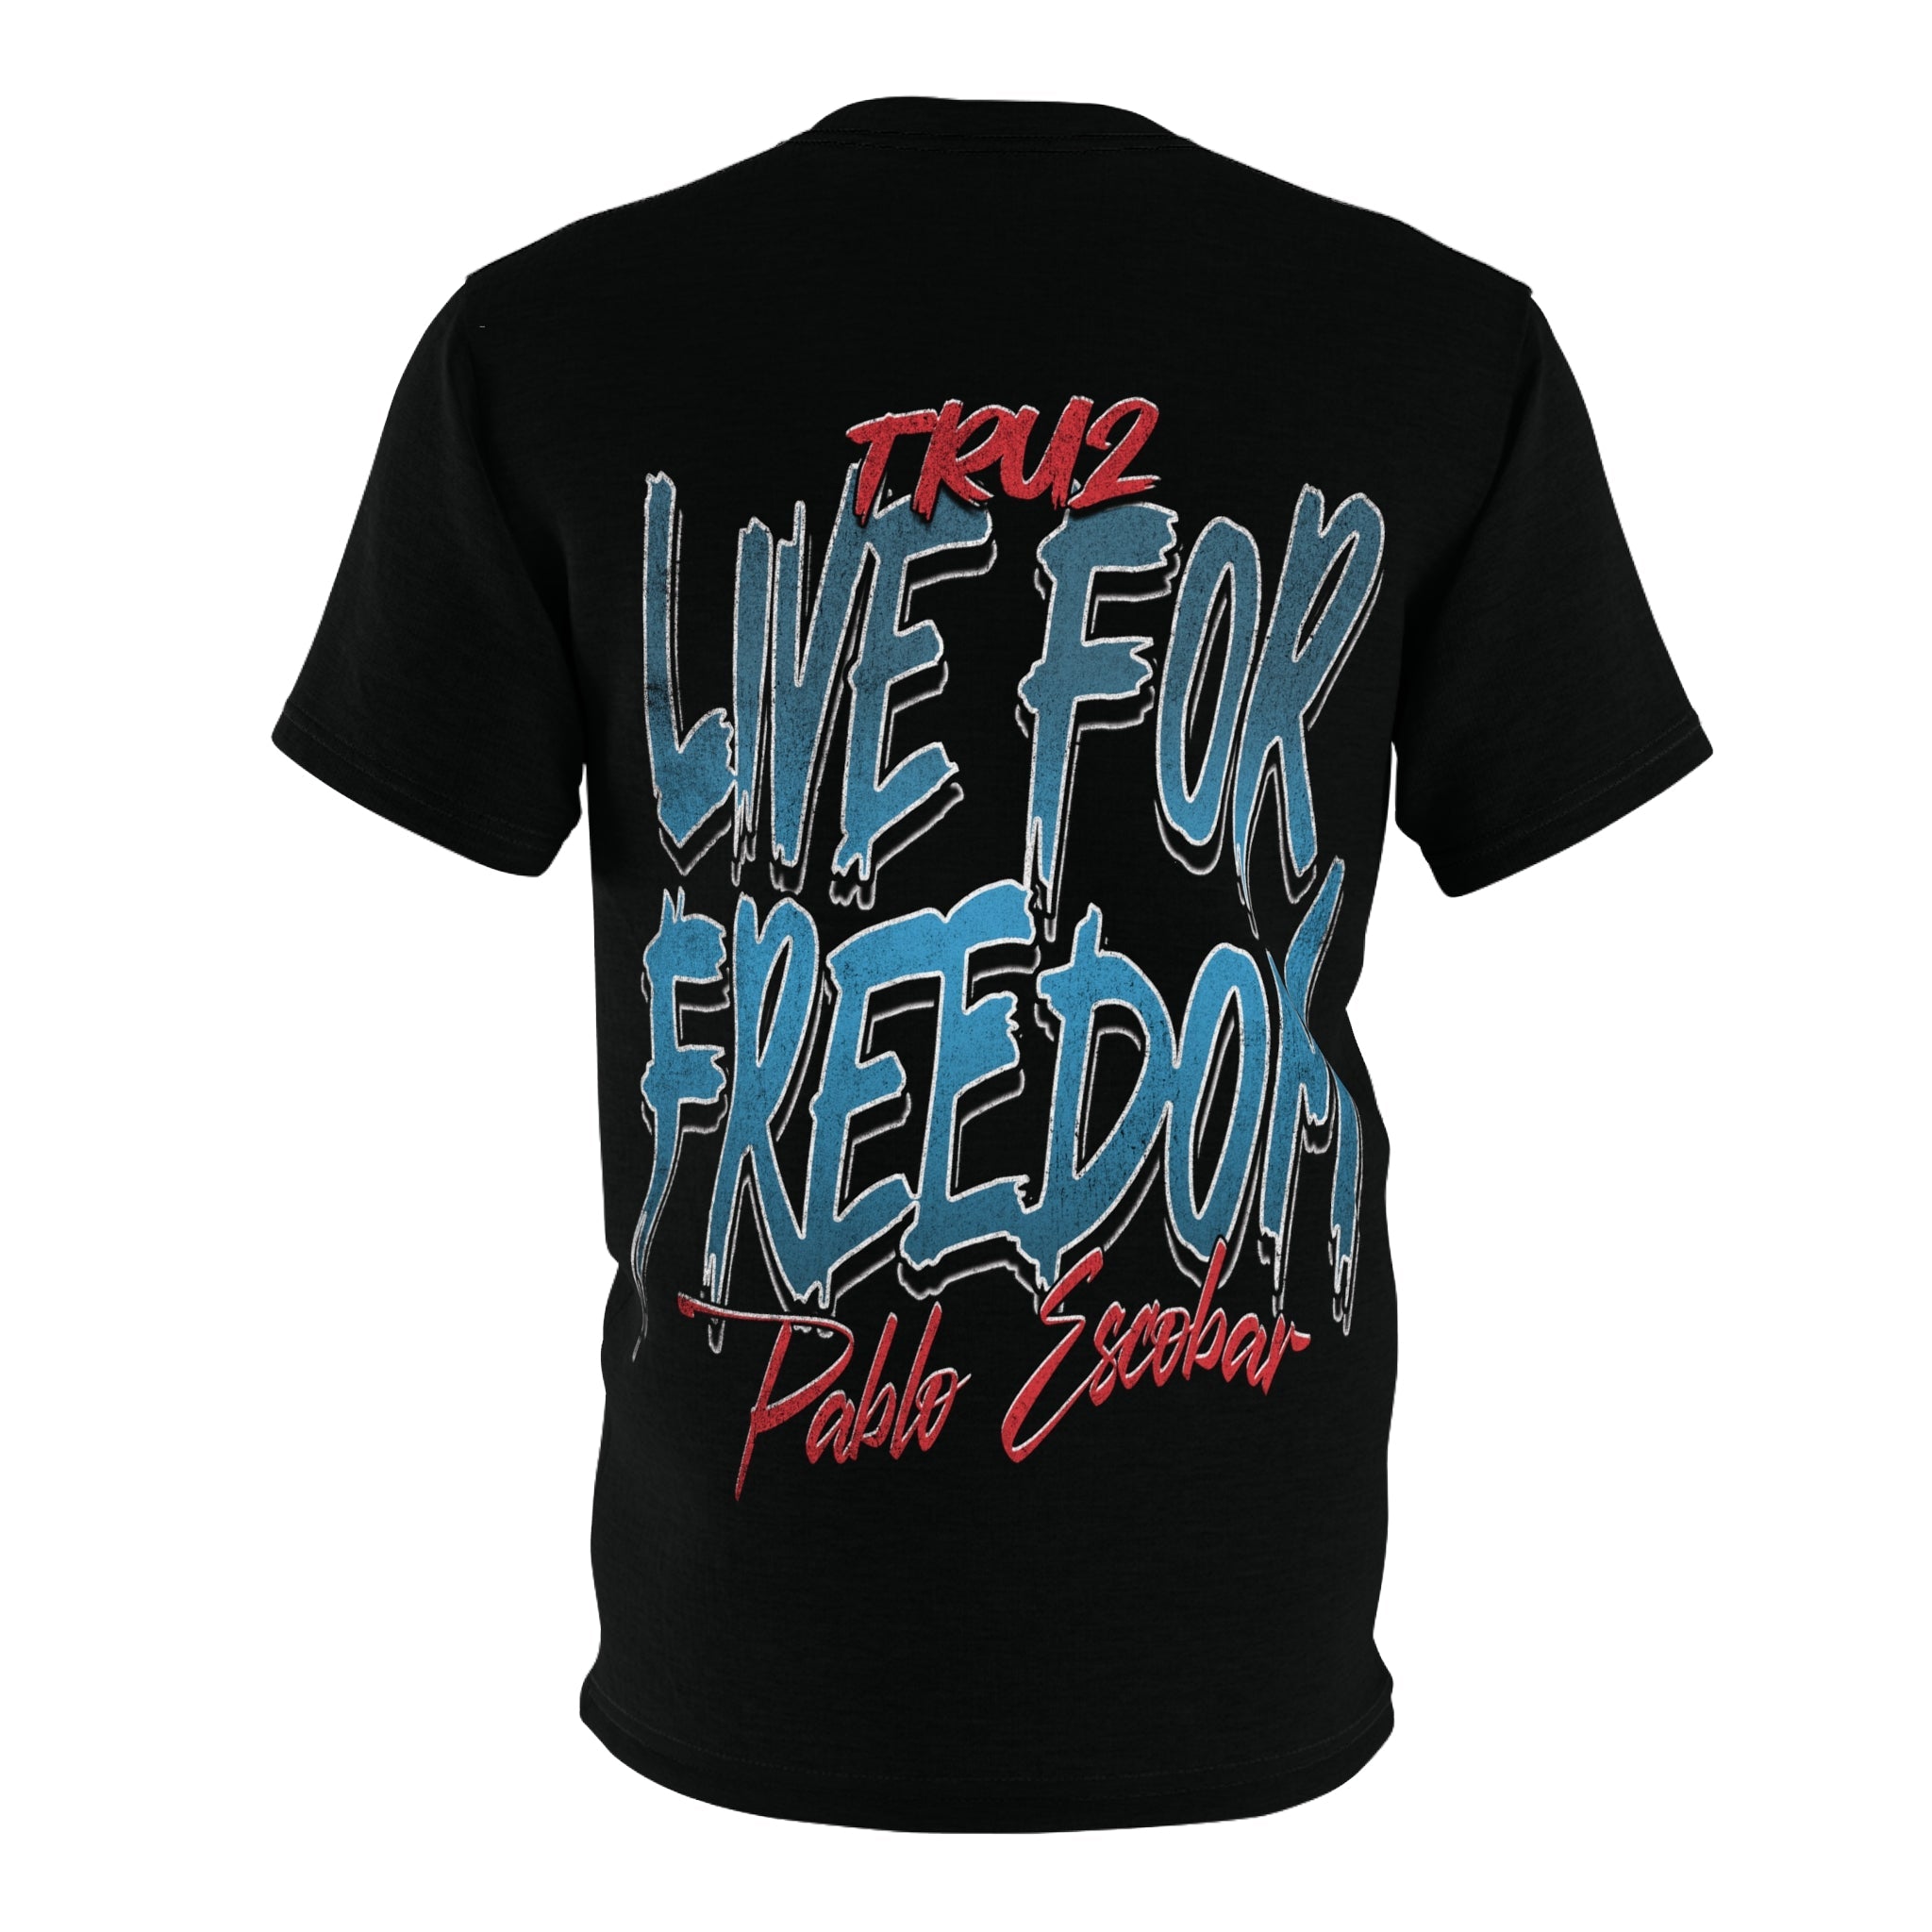 LIVE FOR FREEDOM Pablo Escobar Graphic Tee - TRU2 Clothing